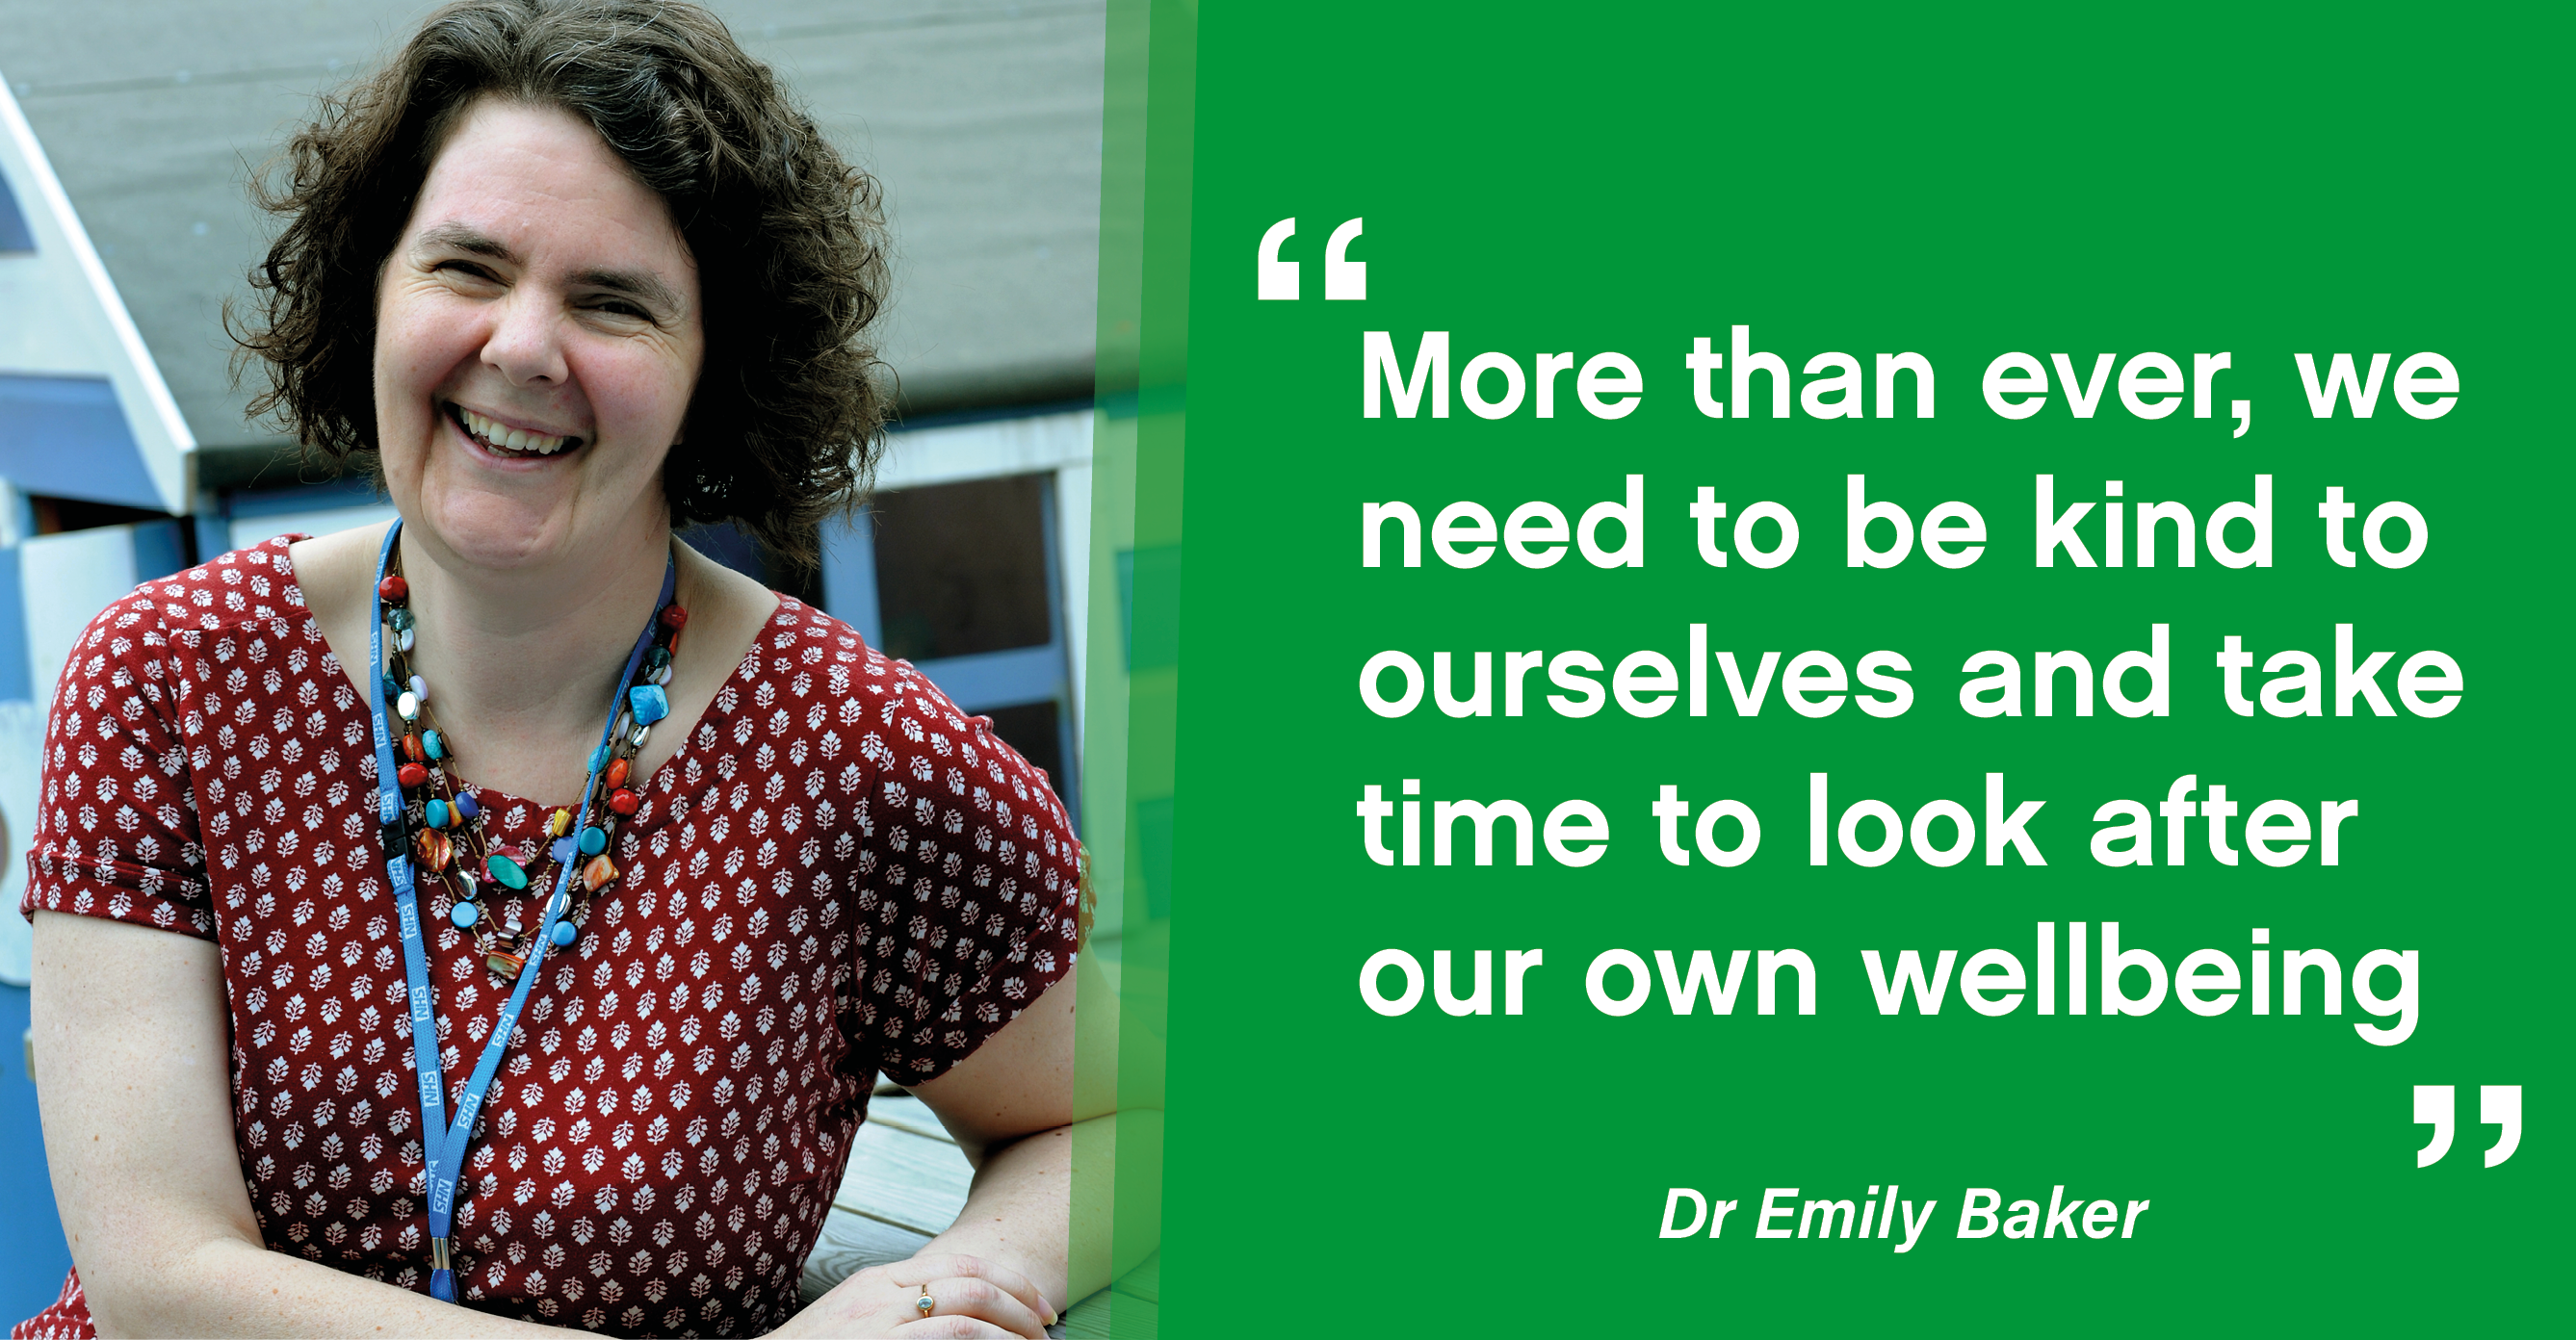 Dr Emily Baker, consultant clinical psychologist.